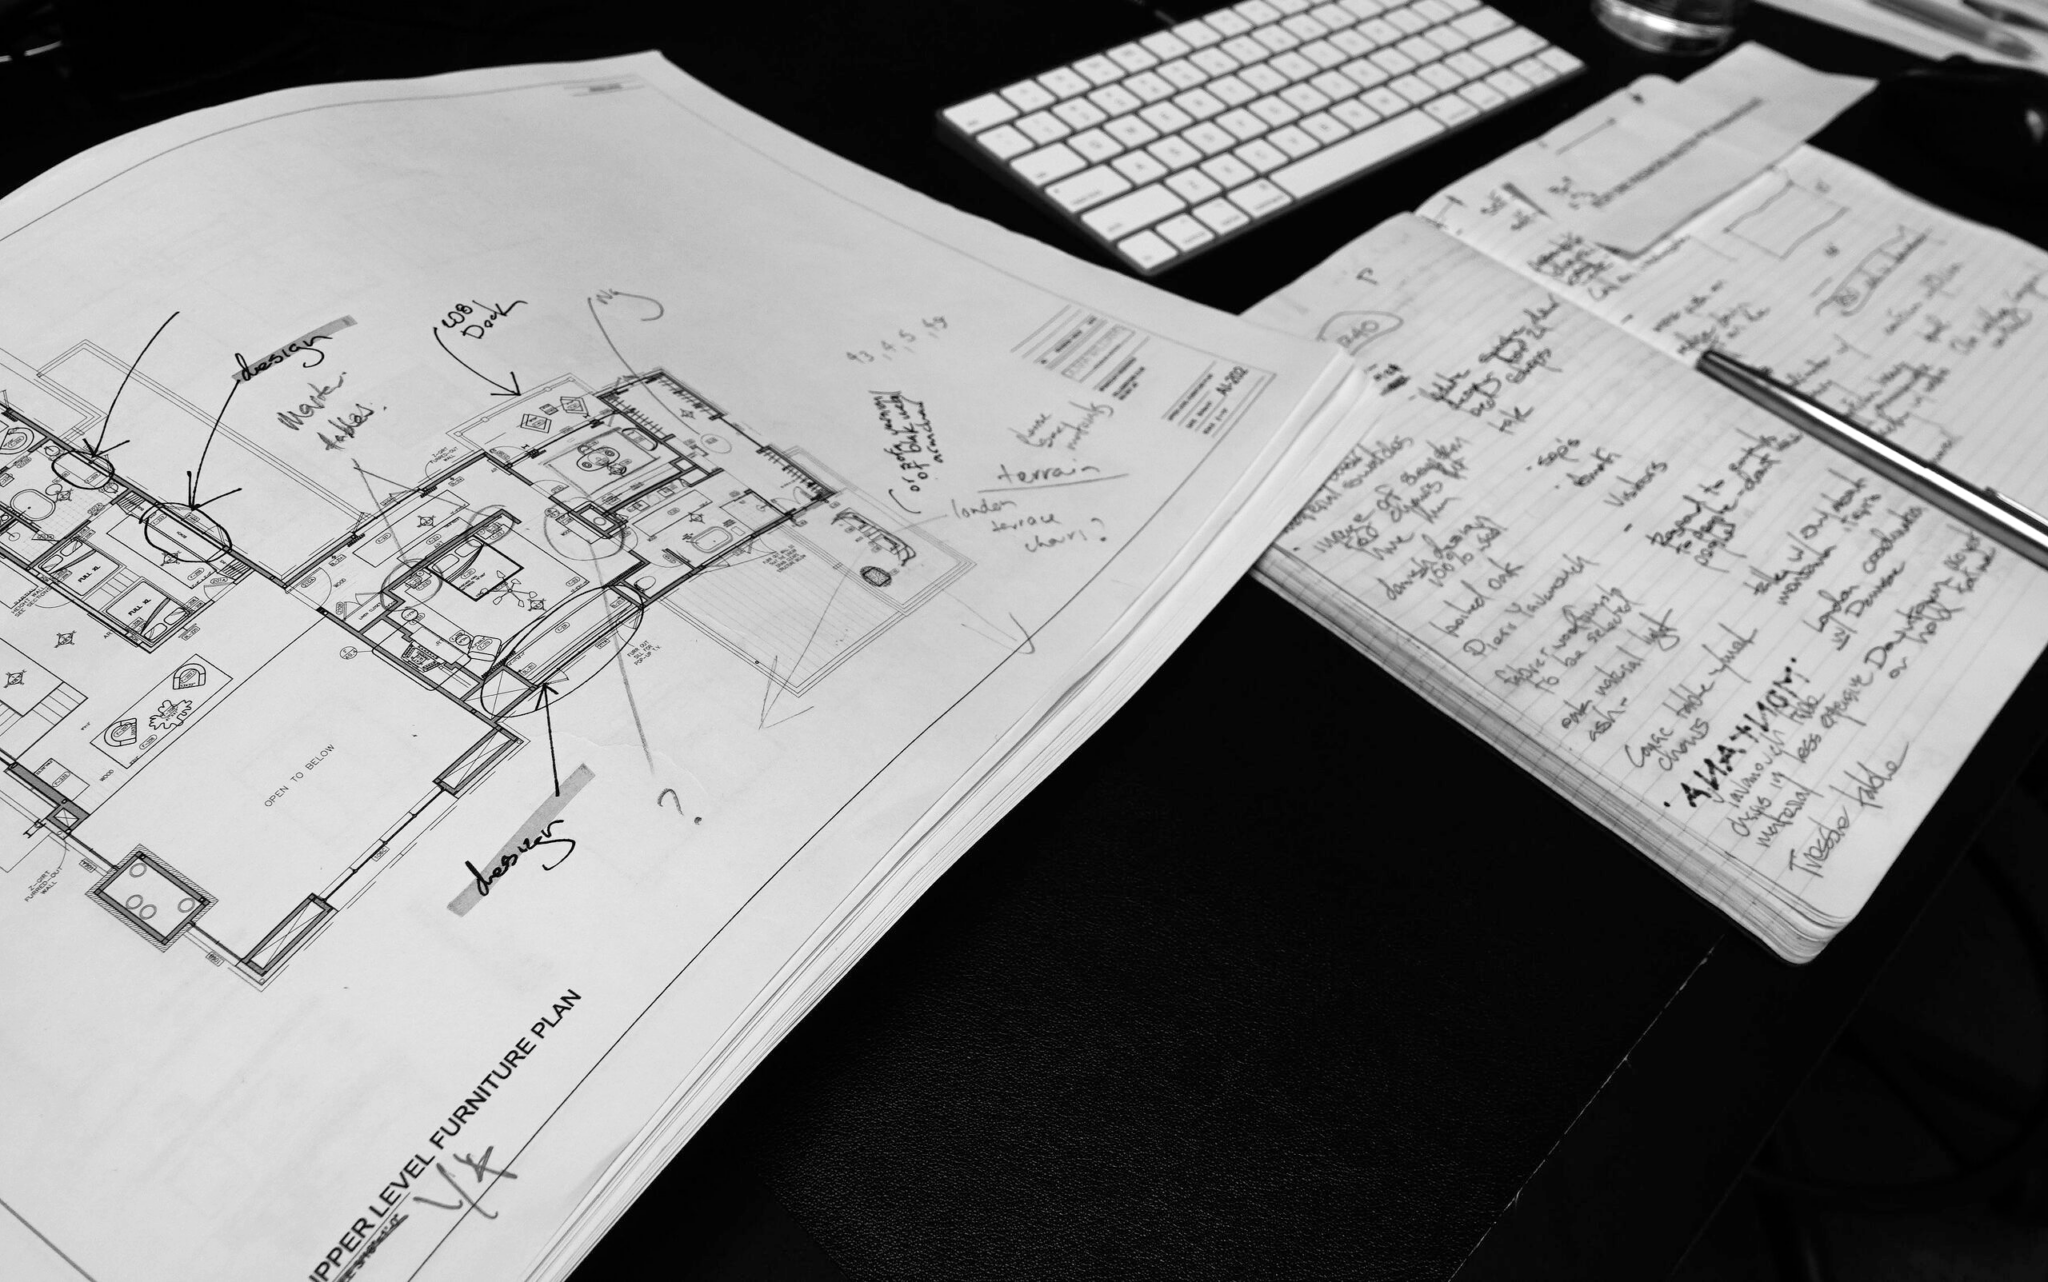 Close up image of notes and furniture plans from the studio.